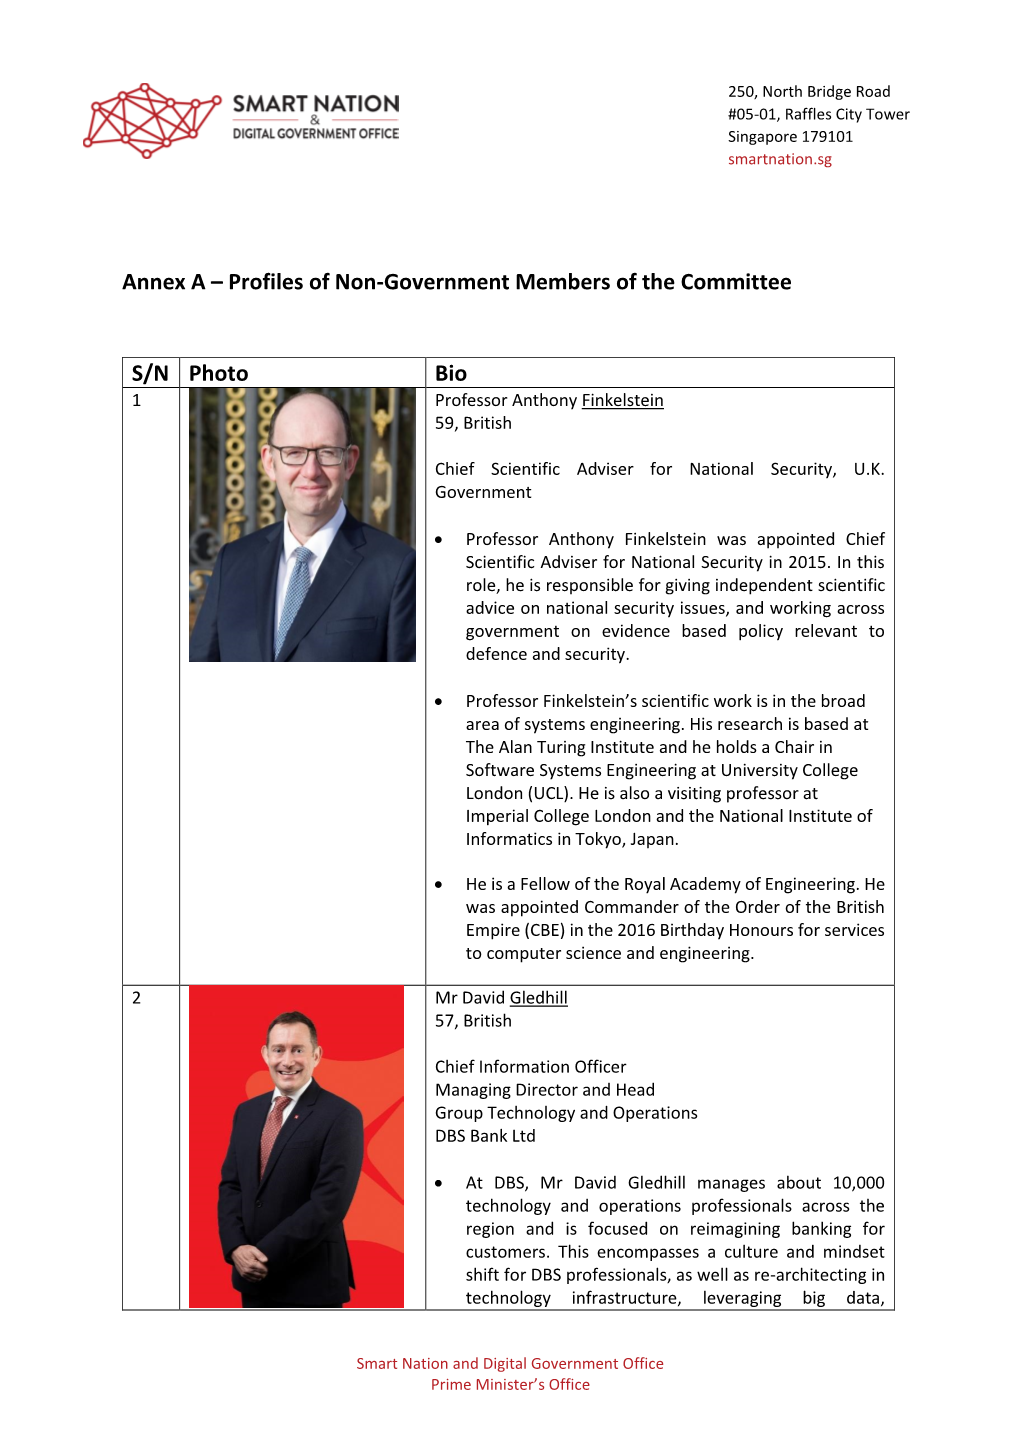 Annex a – Profiles of Non-Government Members of the Committee